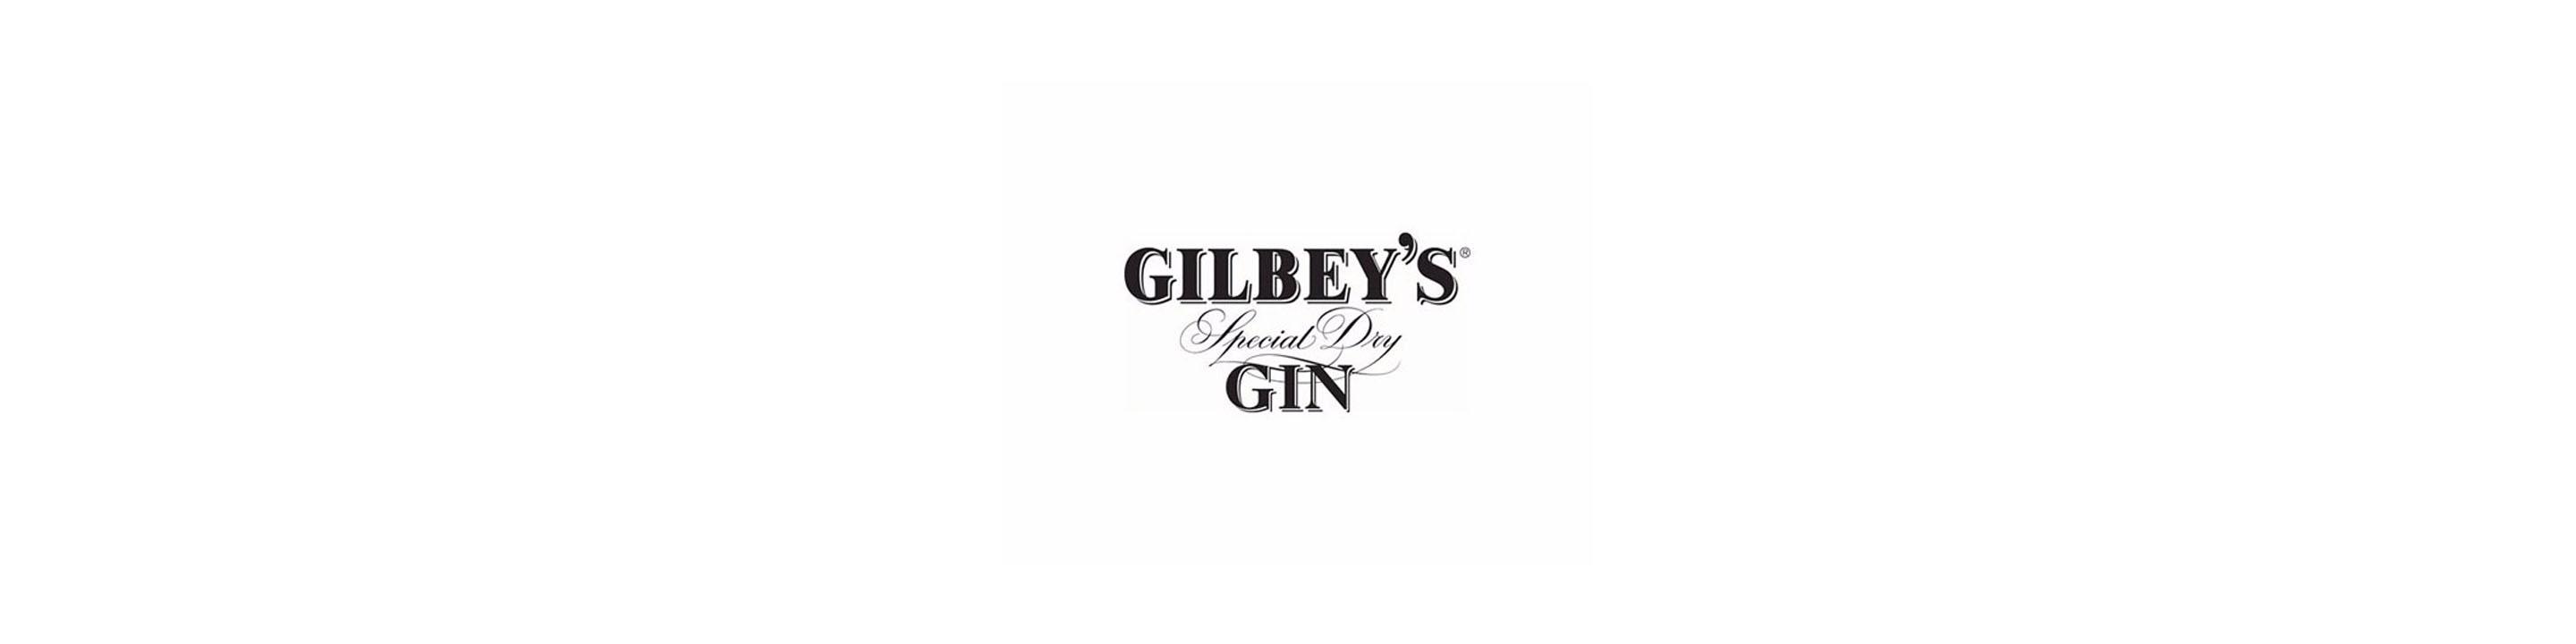 First appearing on the market in 1956, the Gilbey’s® name maintains a reputation for producing only the highest quality spirits. Gilbey’s® continues to deliver premium taste due to being made from the finest grains. 

Buy Gilbey's online now from nearby liquor stores via Minibar Delivery.